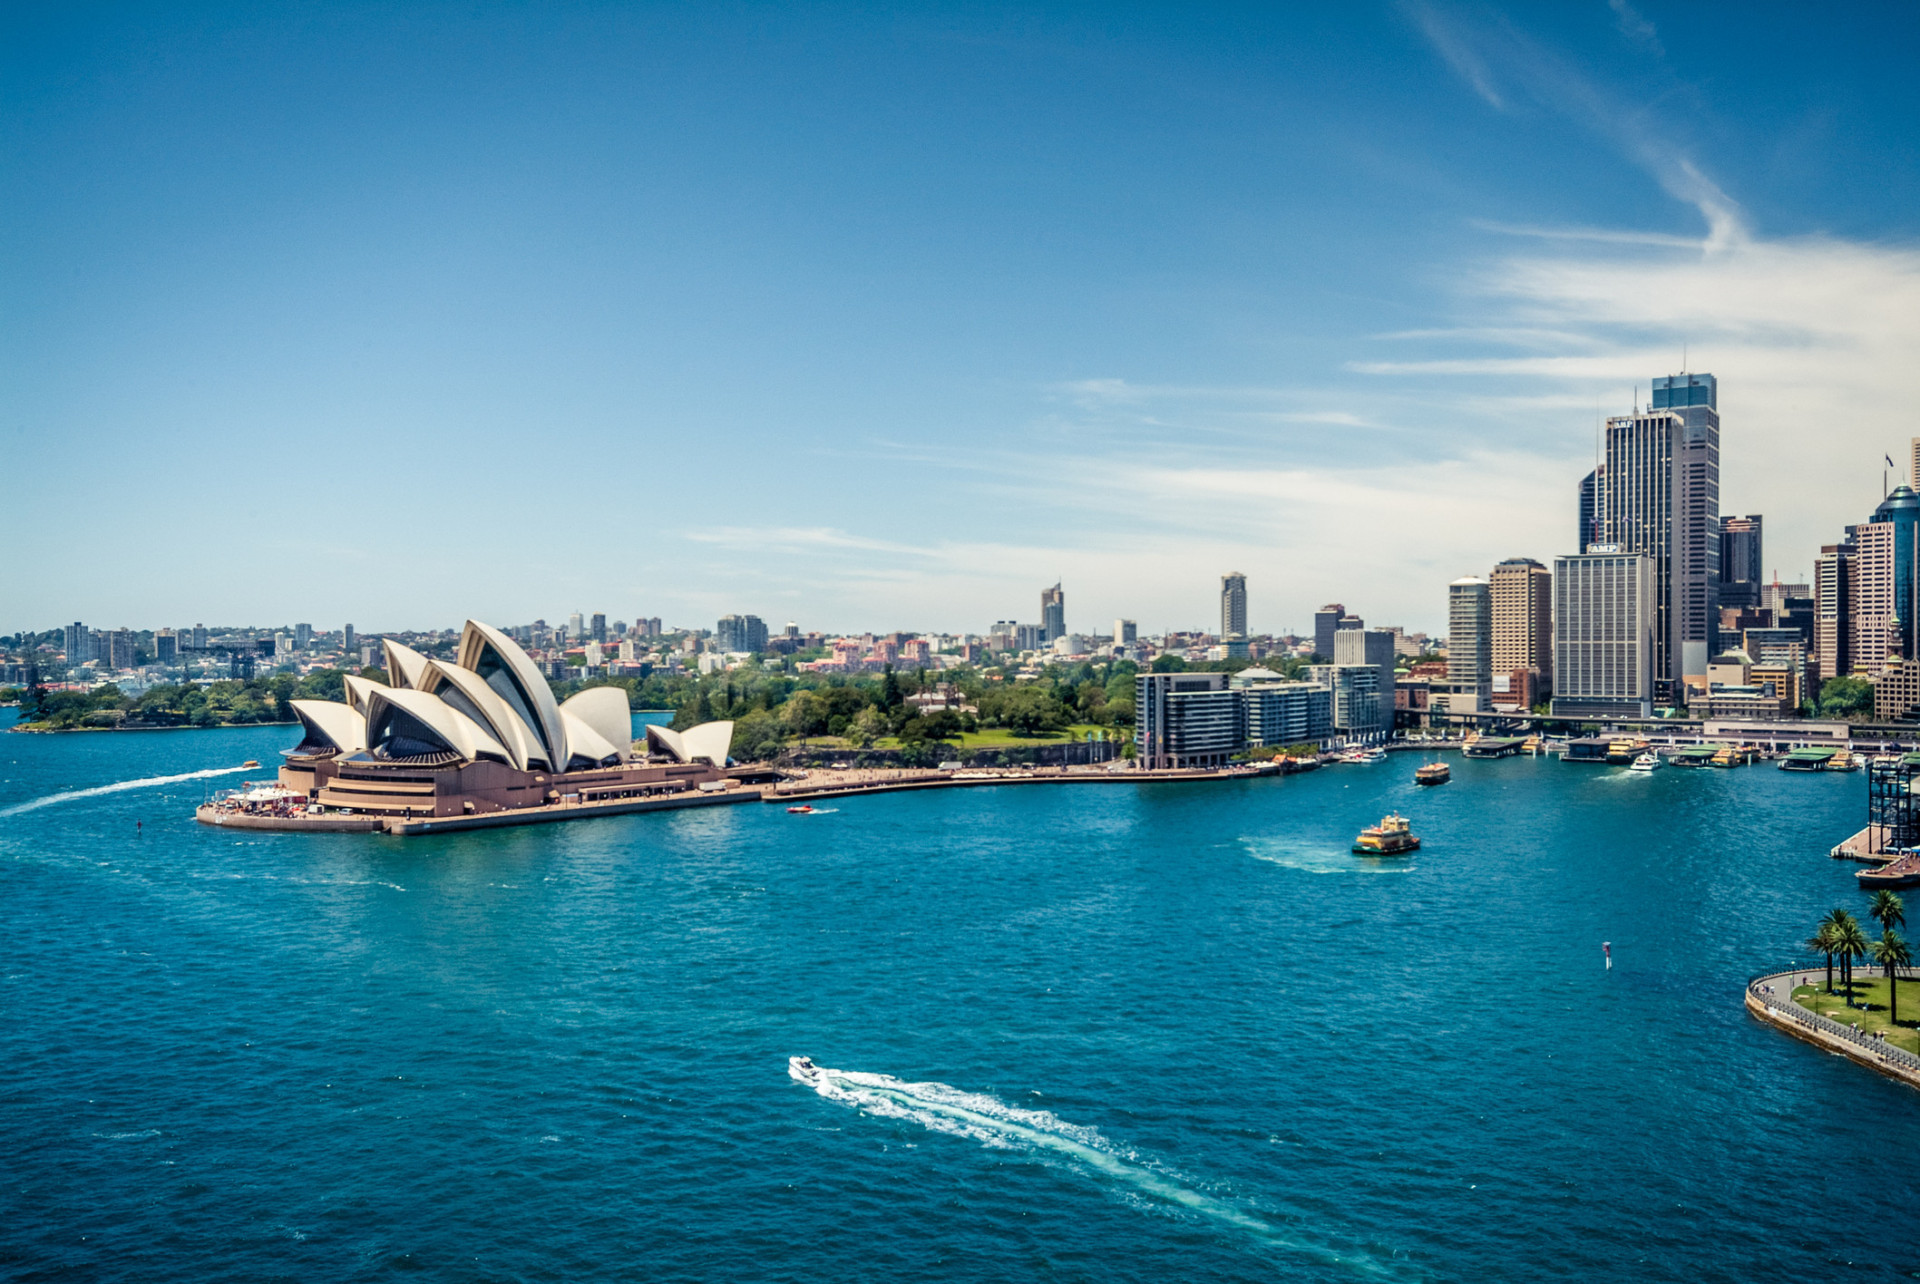 There are so many things happening in Sydney that it's almost impossible to keep up. Highlights include exploring the Sydney Harbour or surfing at the popular Bondi beach.<p>You may also like:<a href="https://www.starsinsider.com/n/442525?utm_source=msn.com&utm_medium=display&utm_campaign=referral_description&utm_content=284295v5en-in"> Everyday things you didn’t realize are harming your mental health</a></p>